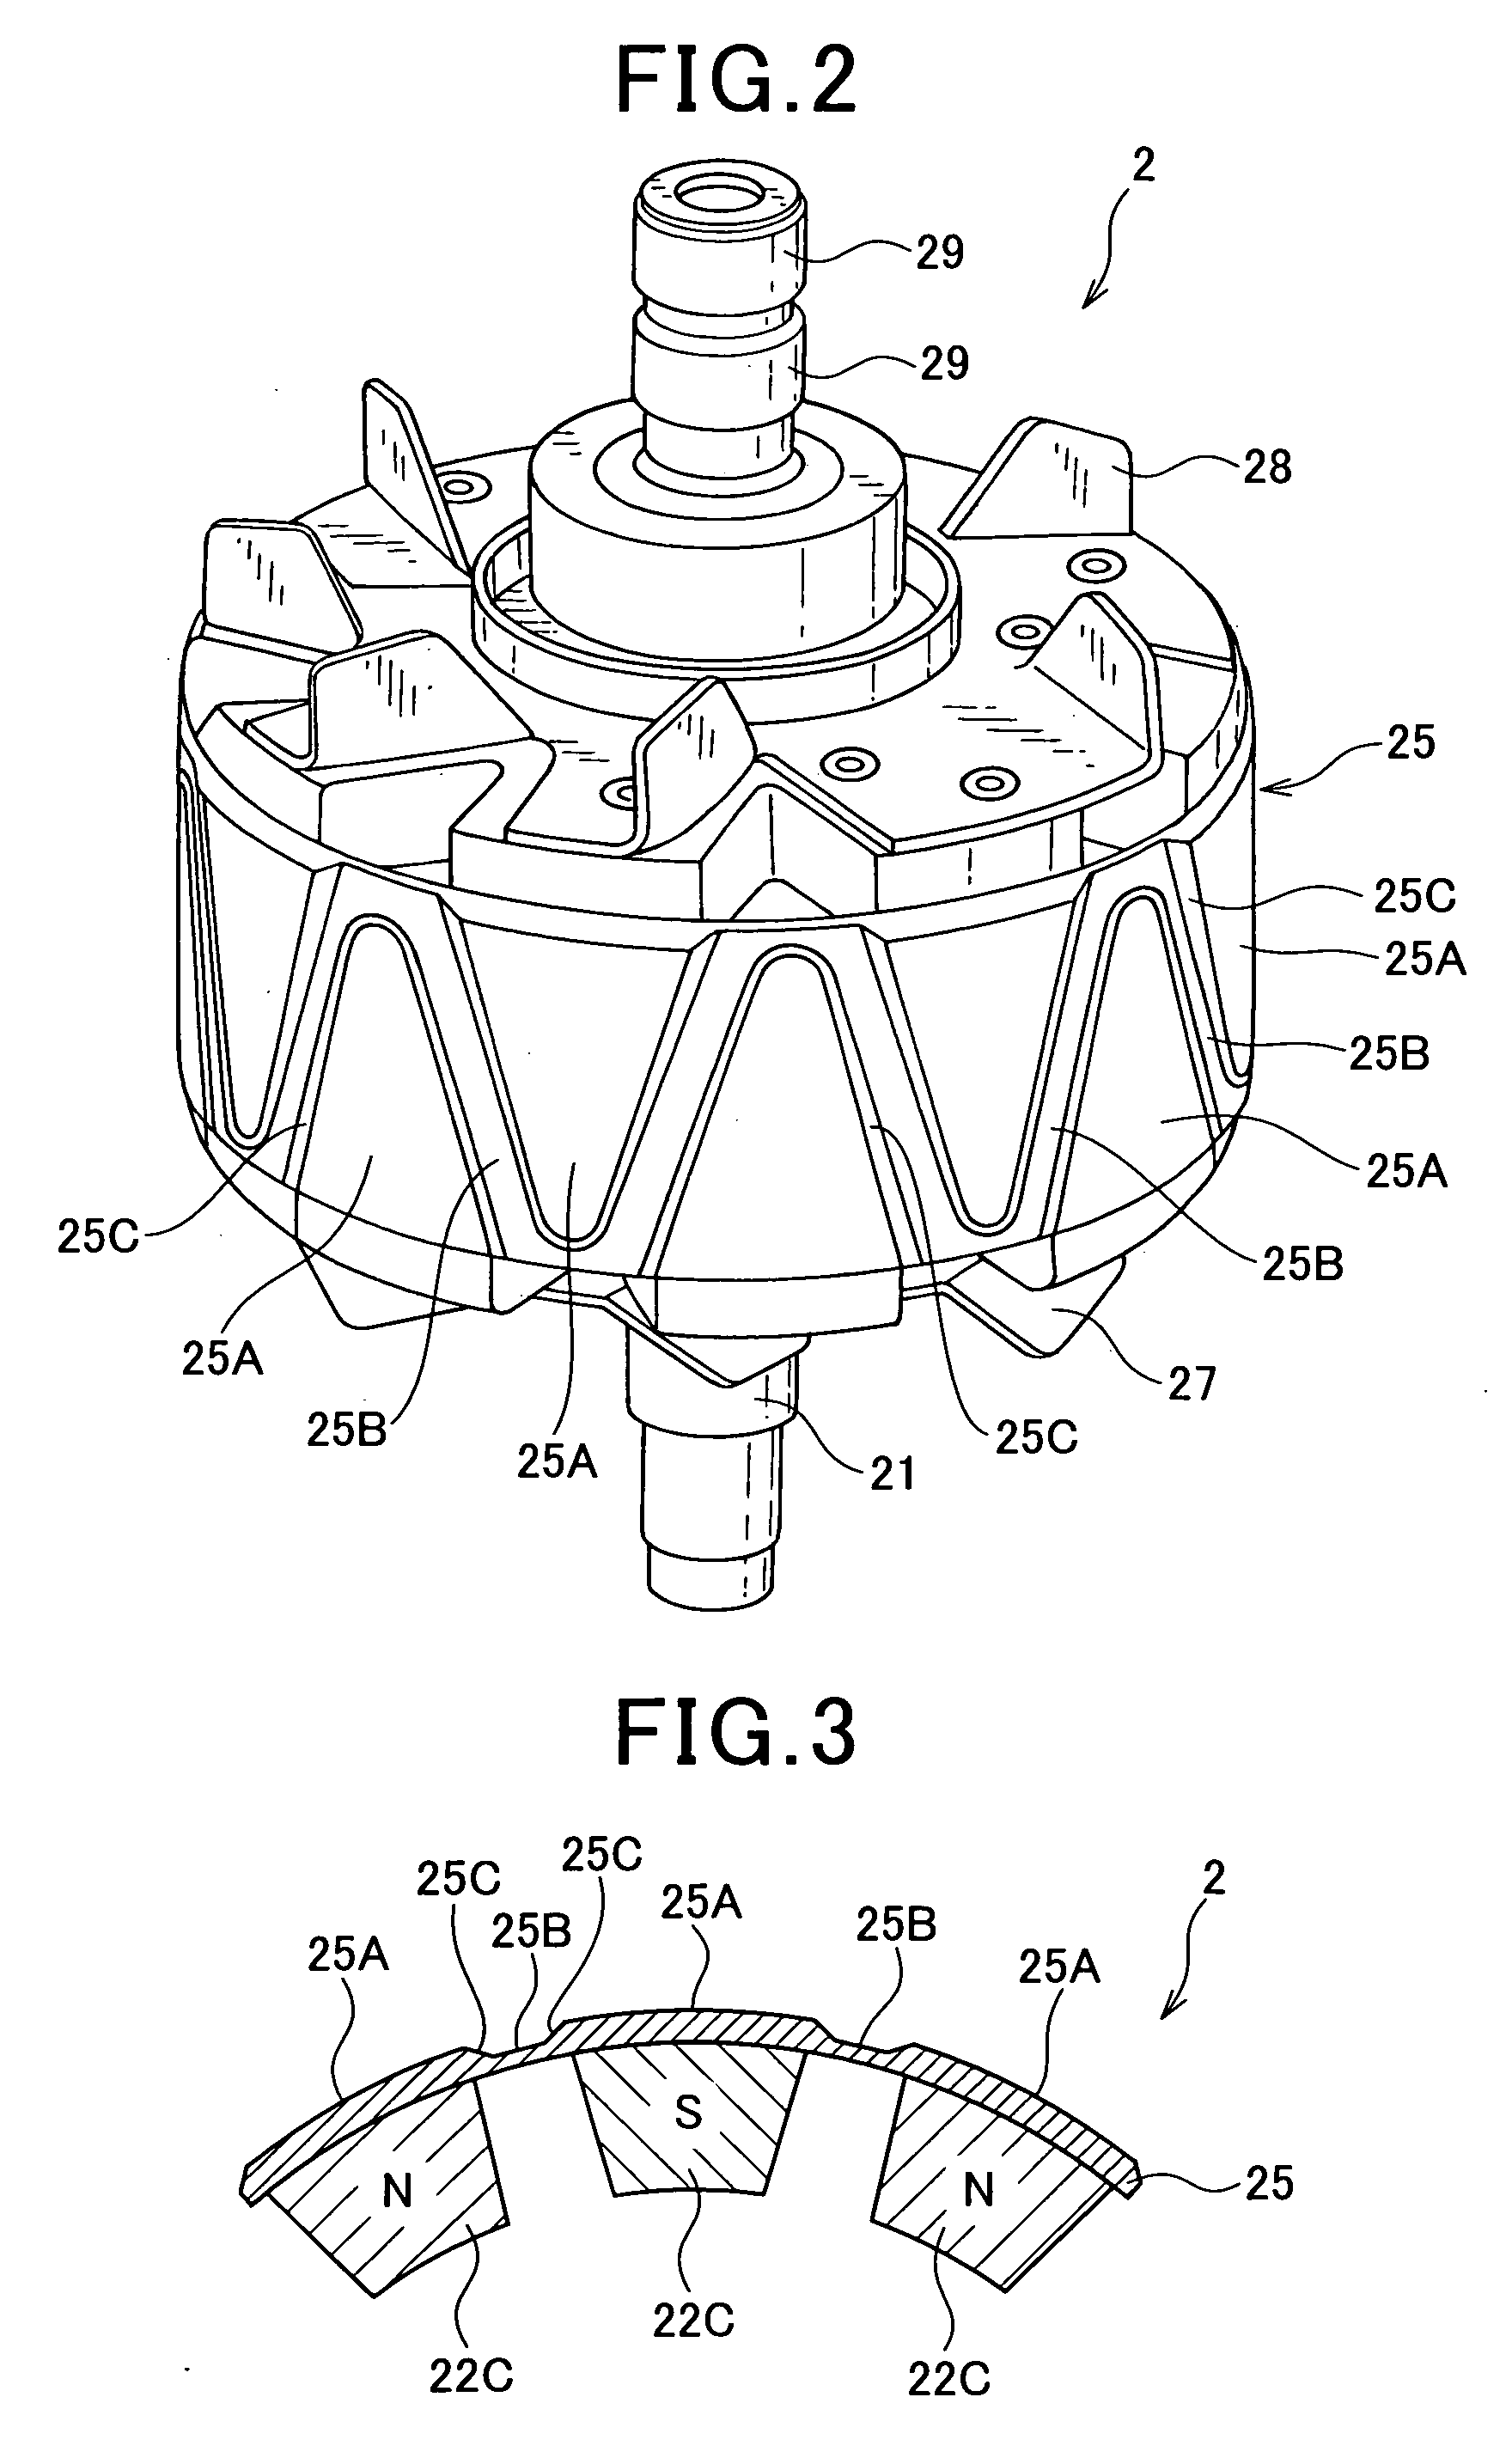 Automotive alternator including annular core having protrusions and recesses alternately formed on its outer surface